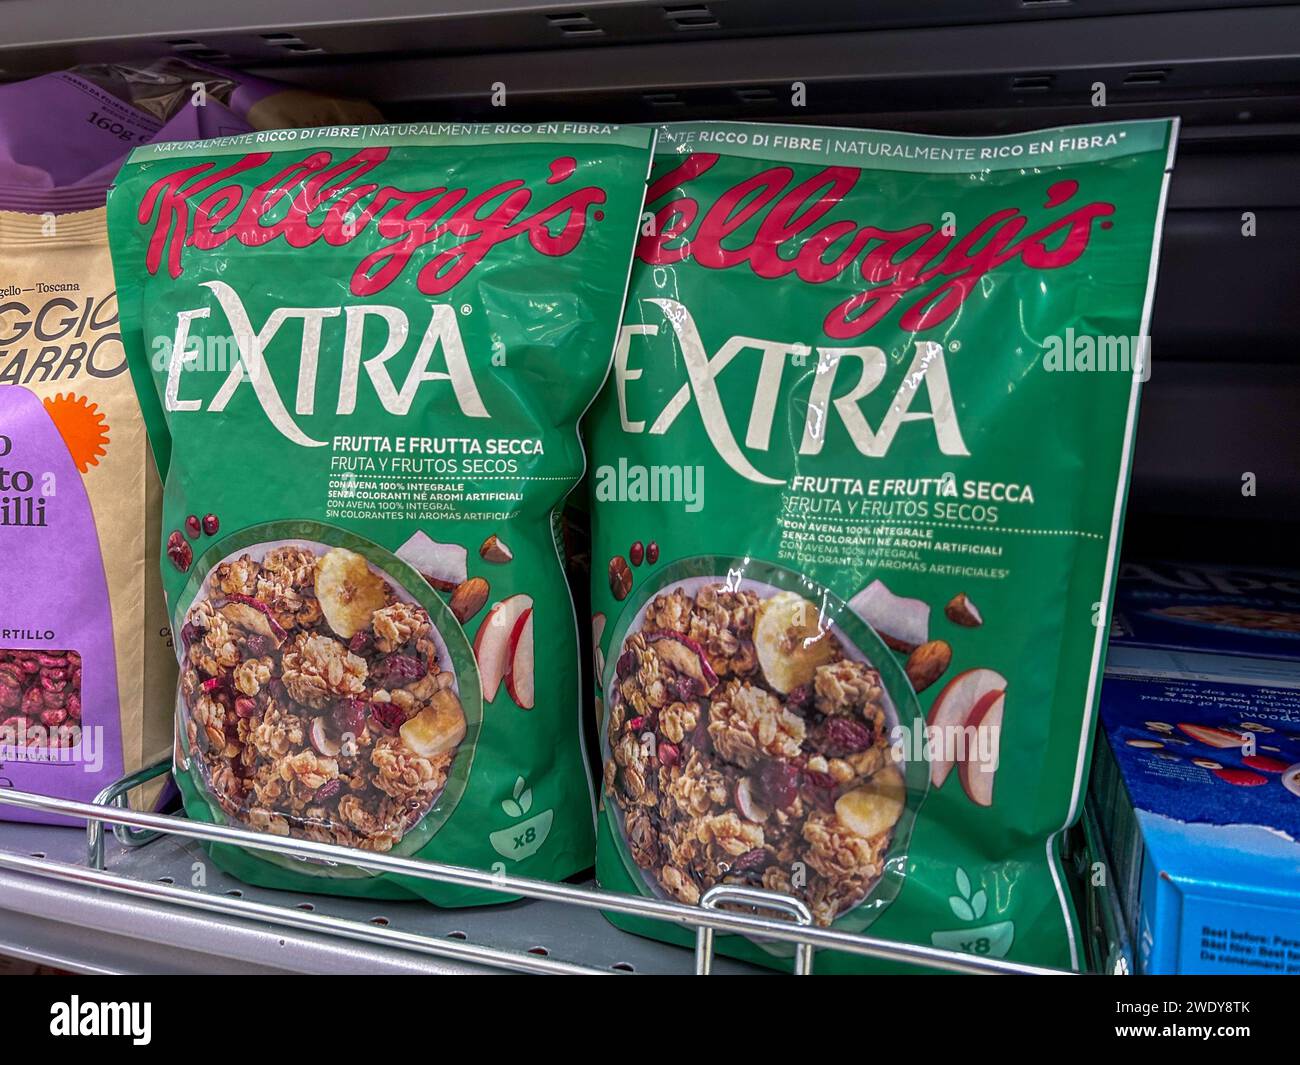 Italy - January 17, 2024: Boxes of Kelloggs Extra Flakes oats with dried fruit displayed for sale in an Italian supermarket Stock Photo